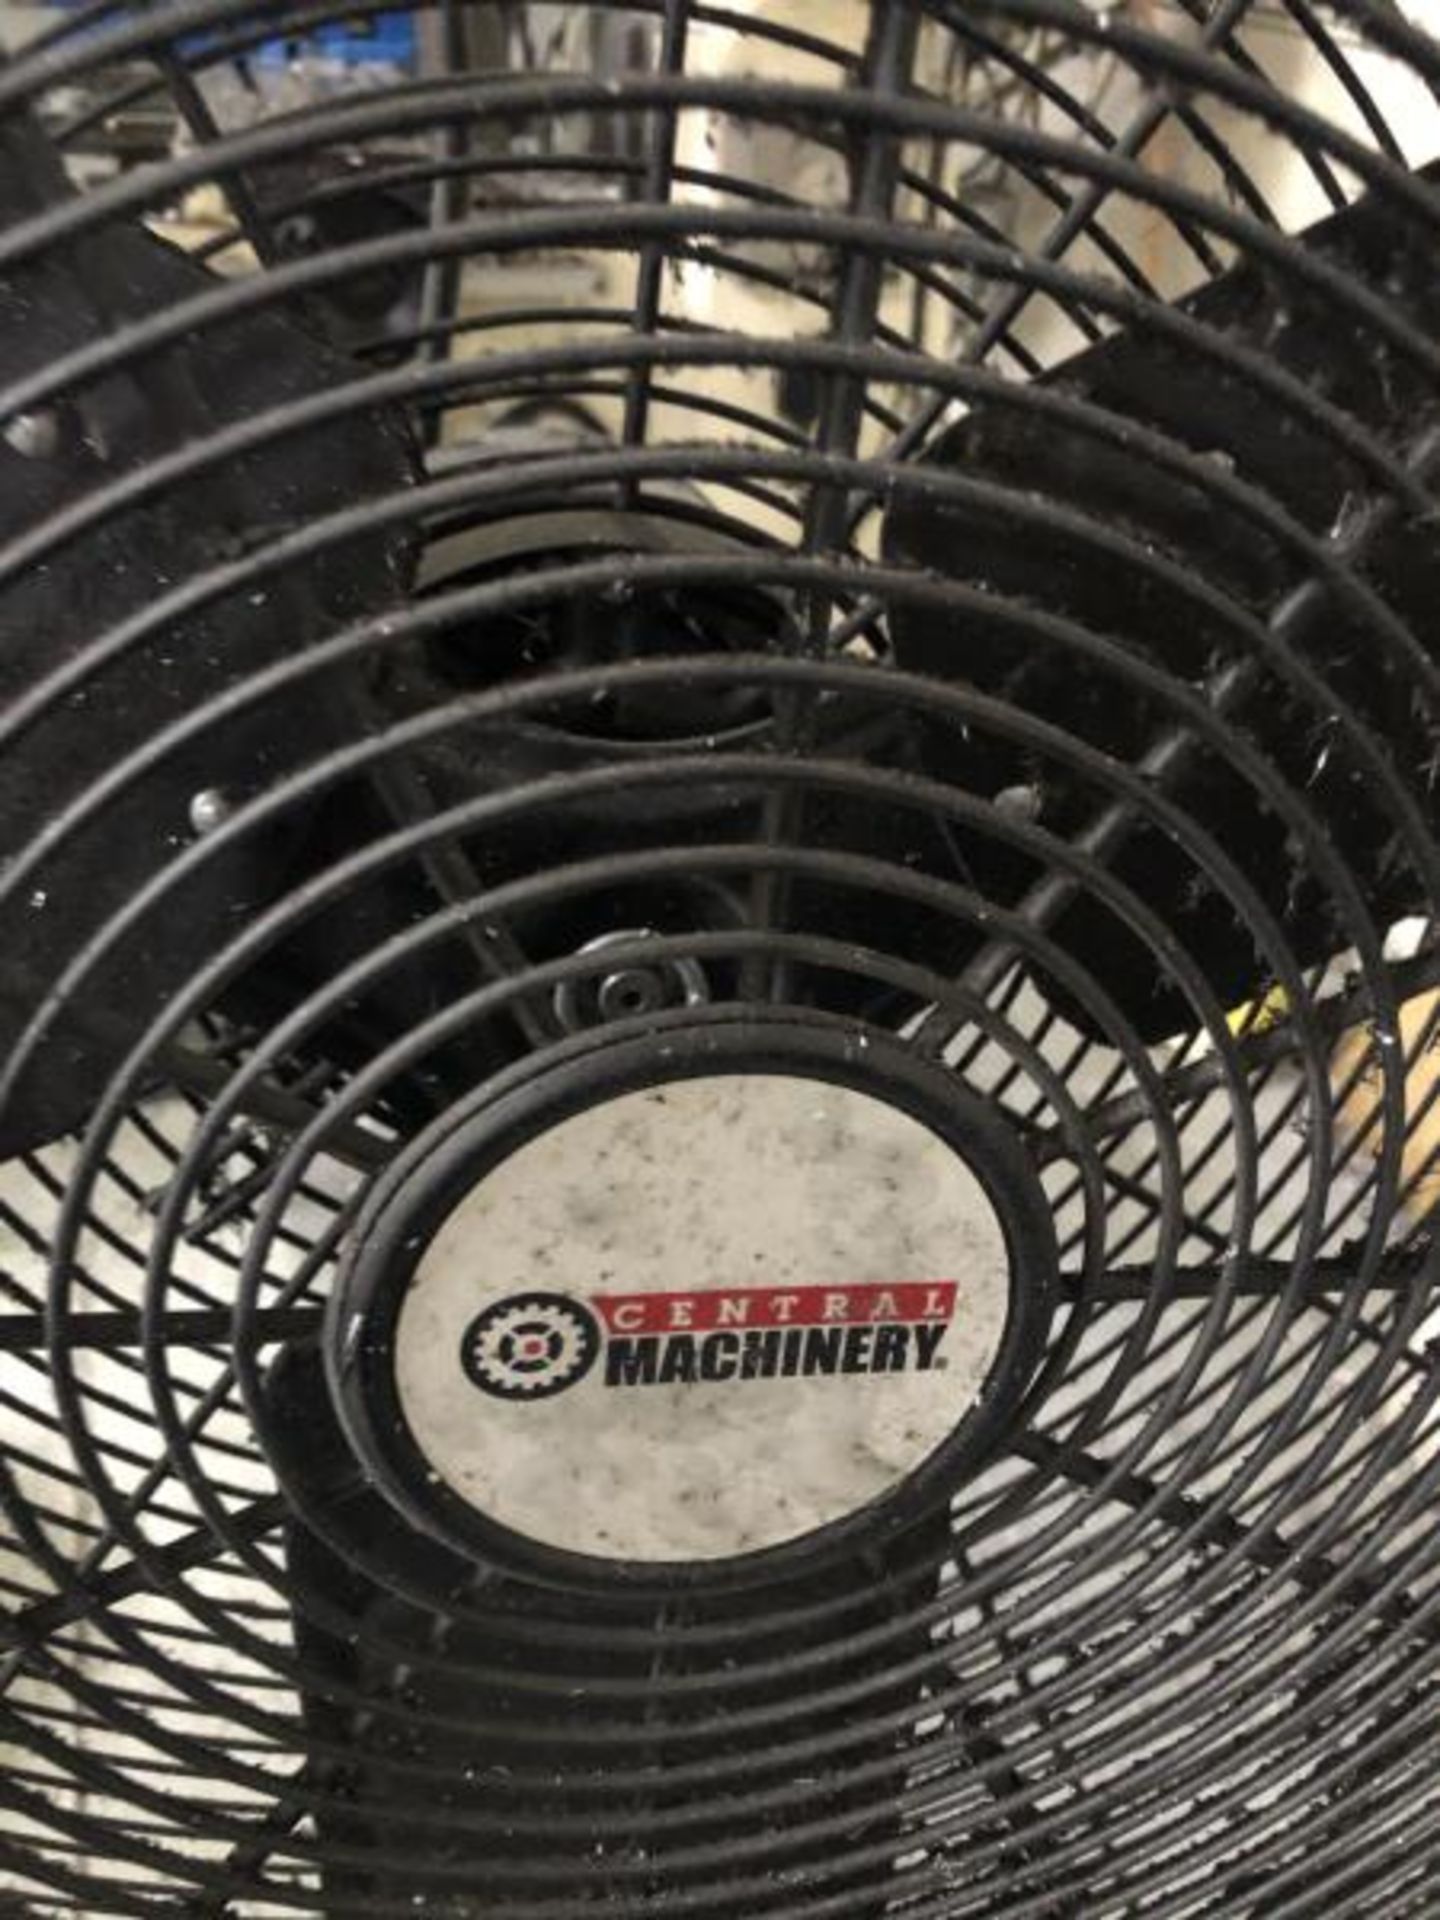 Centra Machinary floor fan - Image 2 of 2